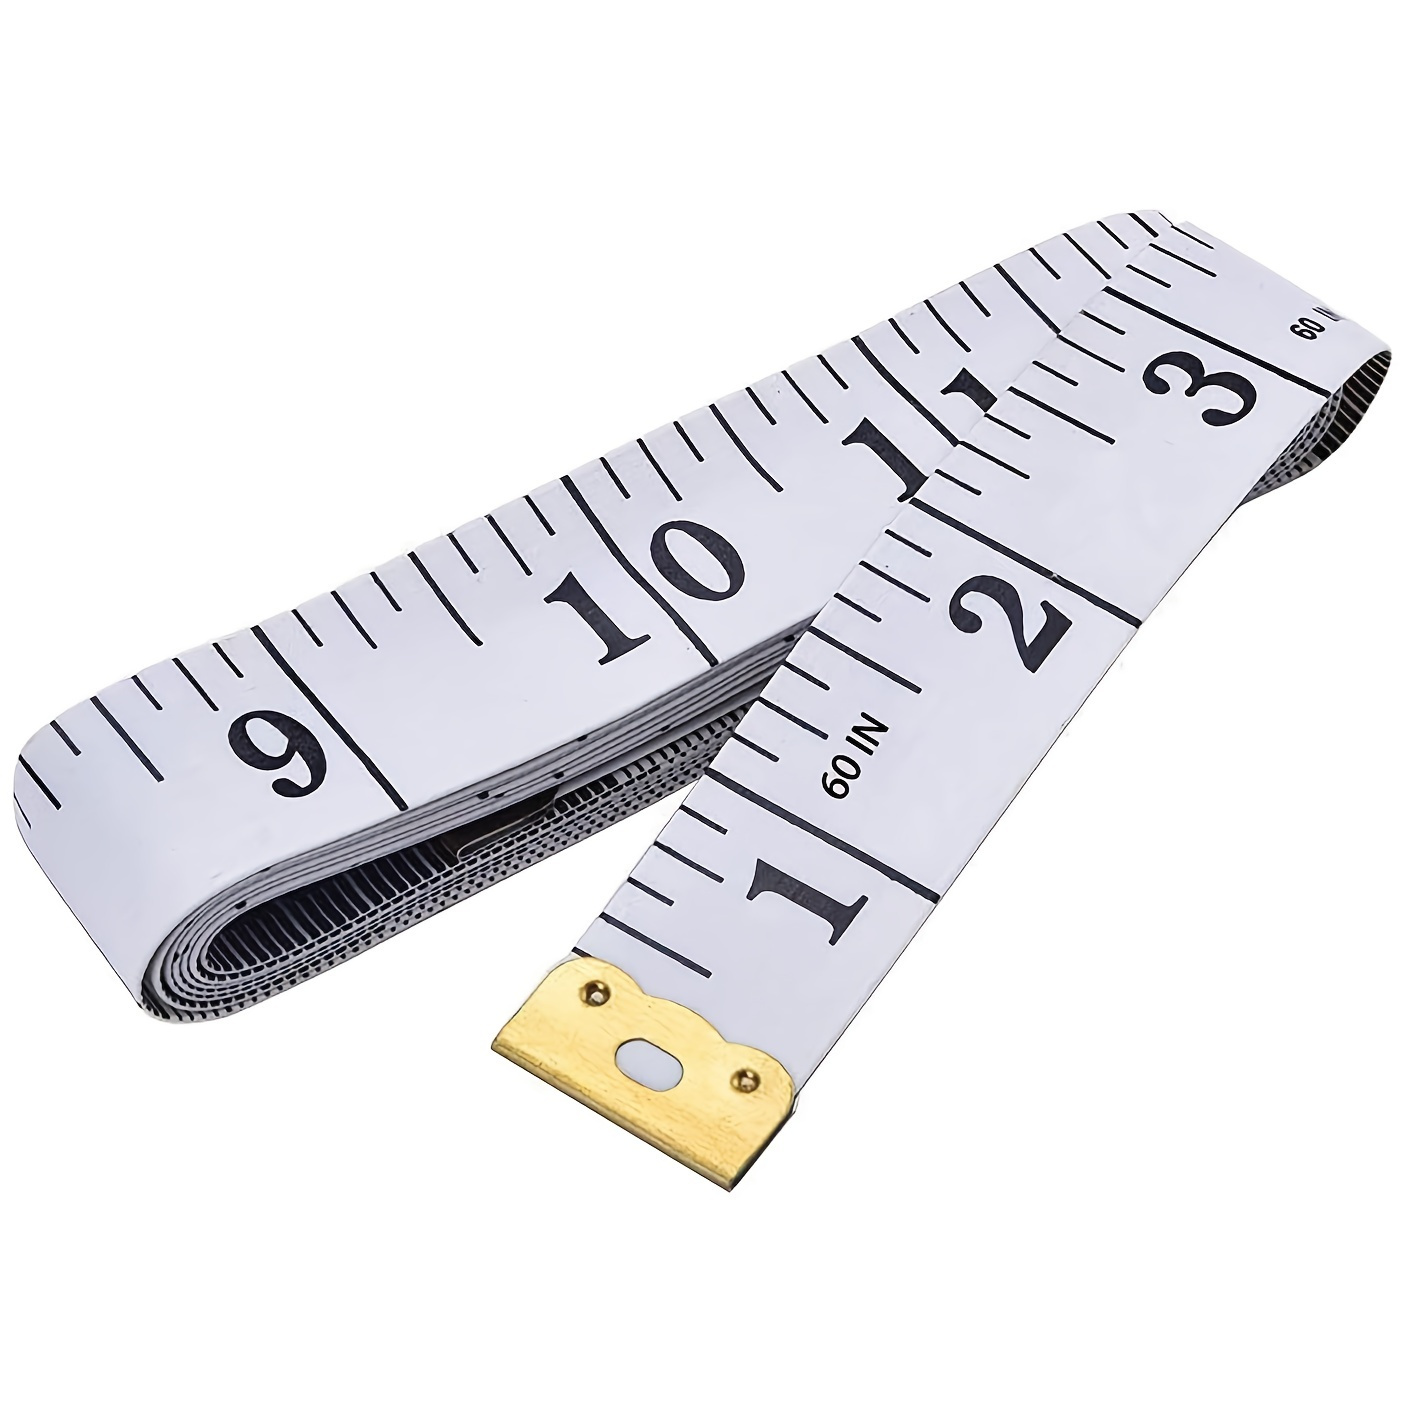 Flexible Fishing Measuring Tape - Double Scale Ruler For Accurate